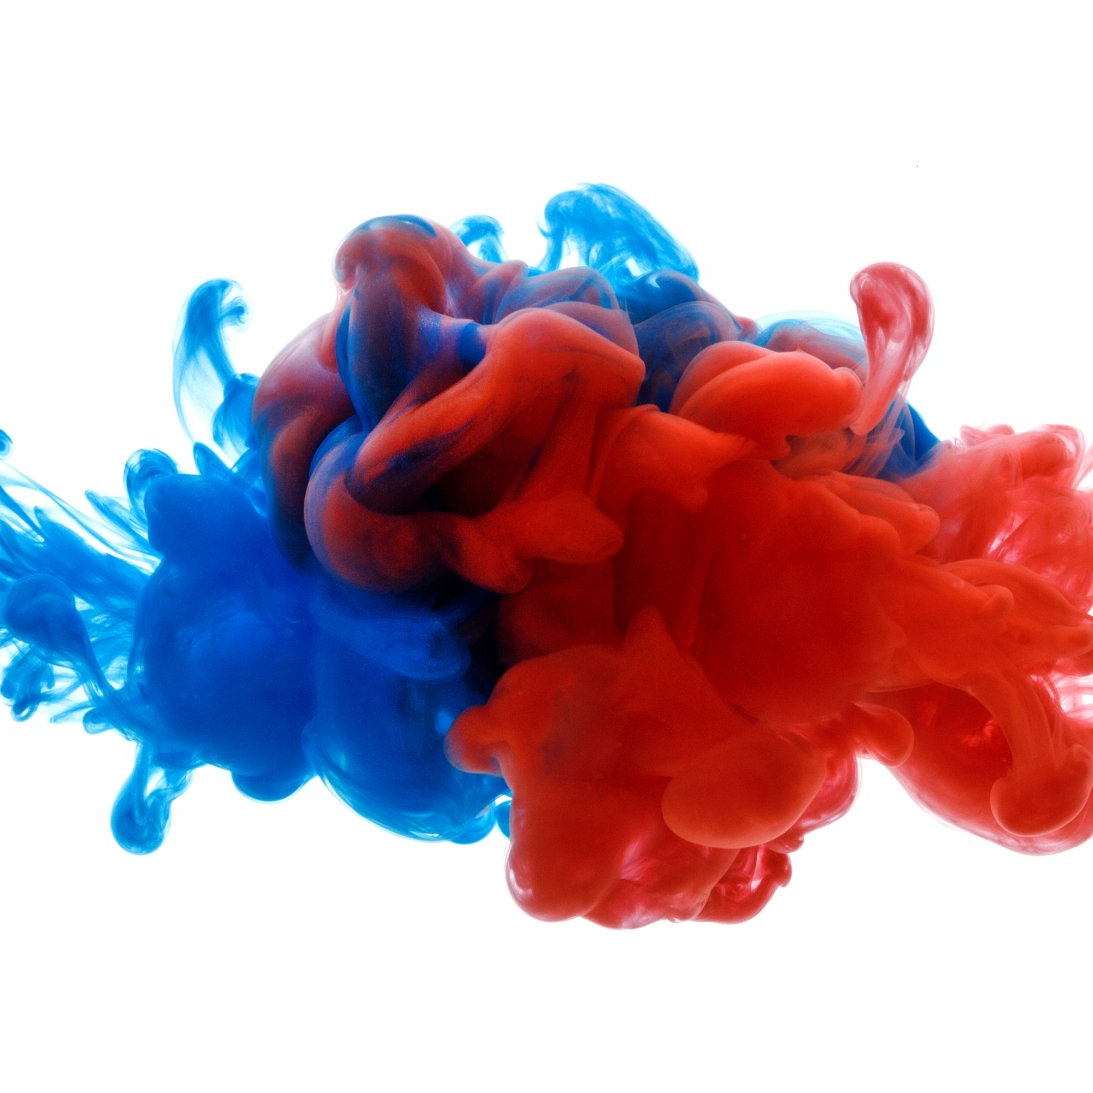 Photograph of red and blue ink merging in water